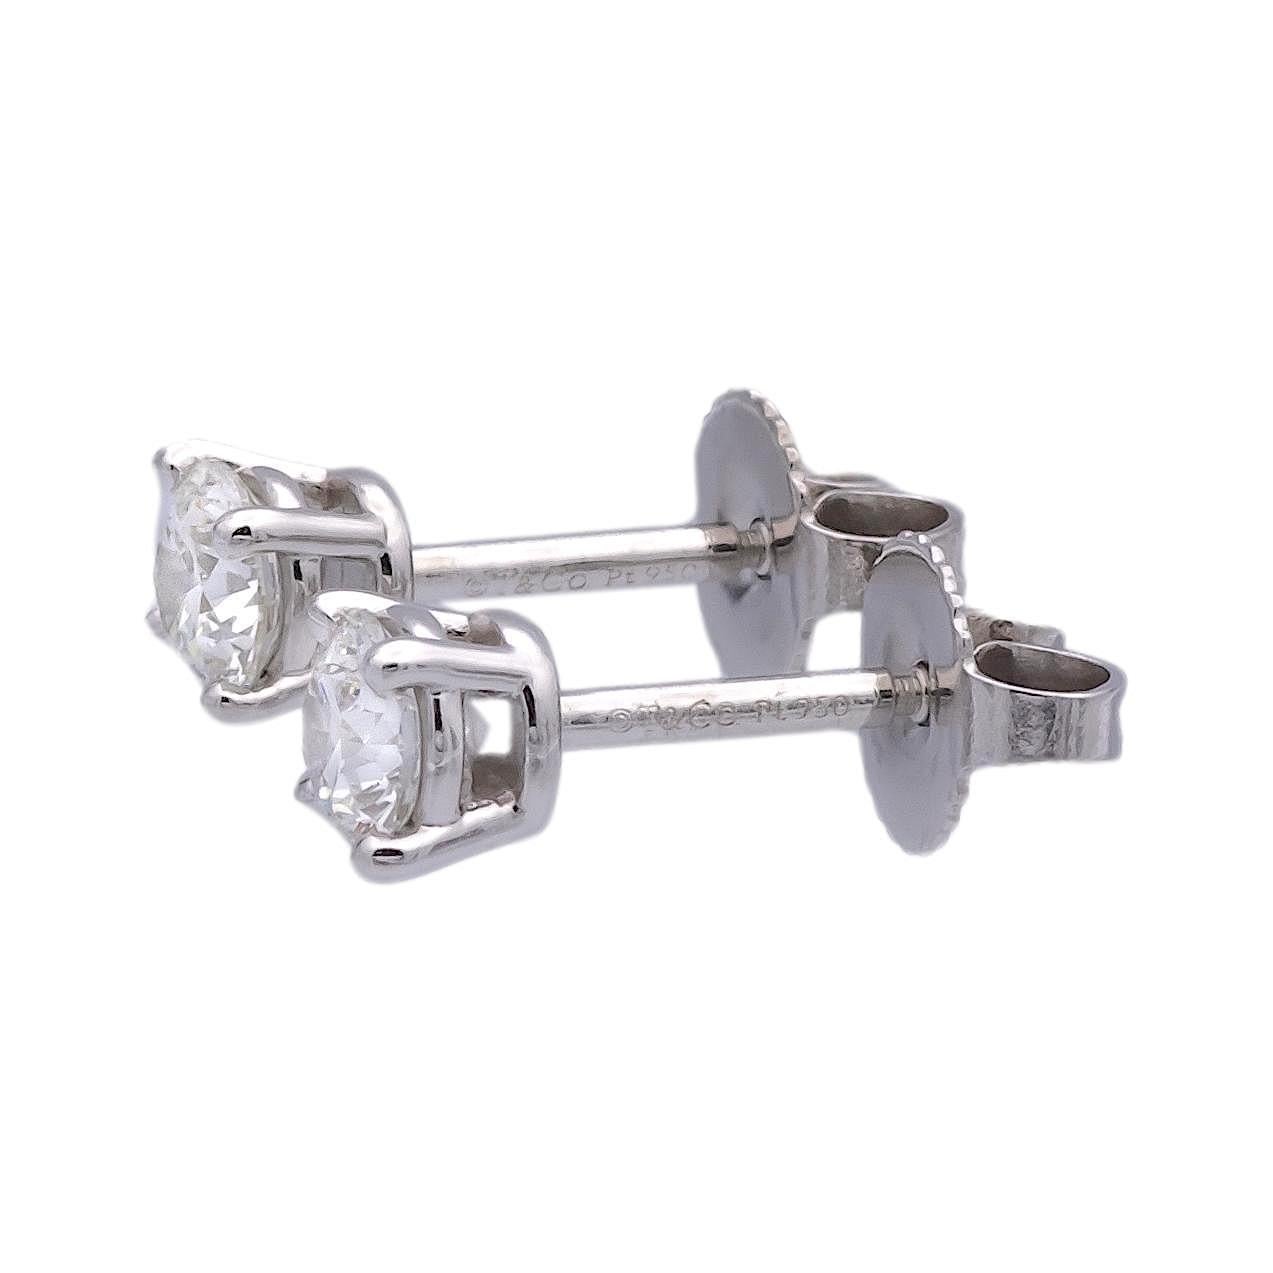 Pair of Tiffany & Co. Diamond Stud earrings finely crafted in a Platinum 4 prong basket setting featuring two perfectly matched round brilliant cut diamonds weighing 0.62 carats total weight. One round brilliant diamond weighs 0.31 carats graded F